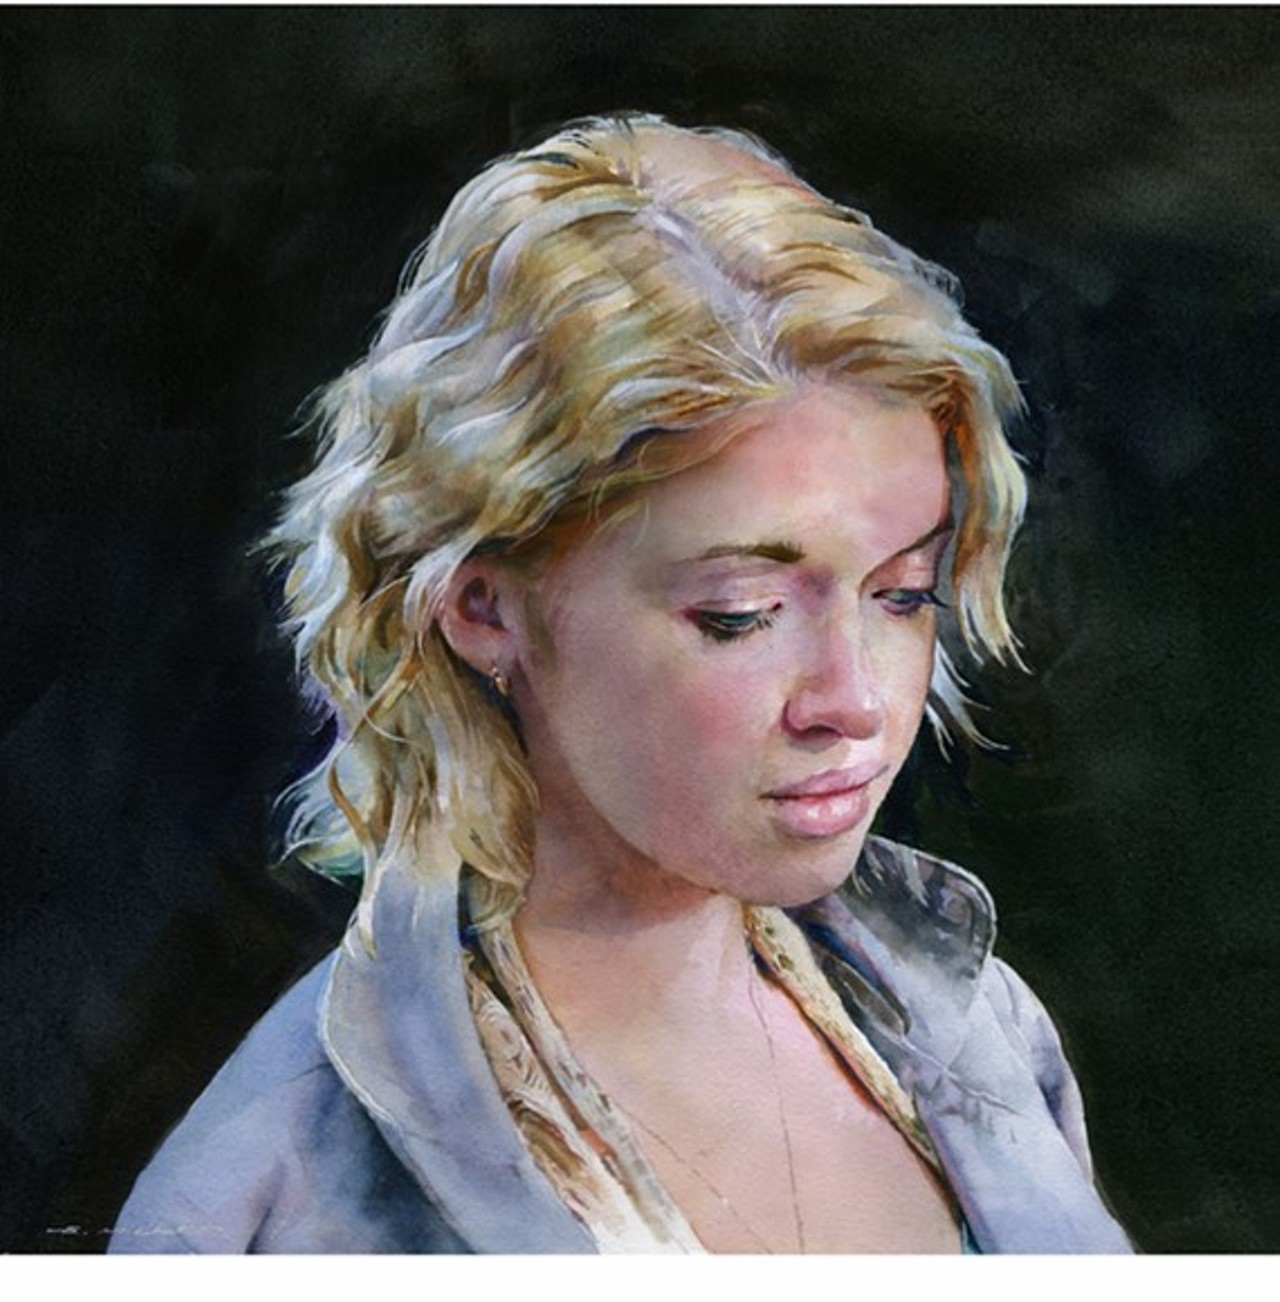 STAN MILLER ARTIST - "Grace" watercolor painting, 14 x 14 inches.